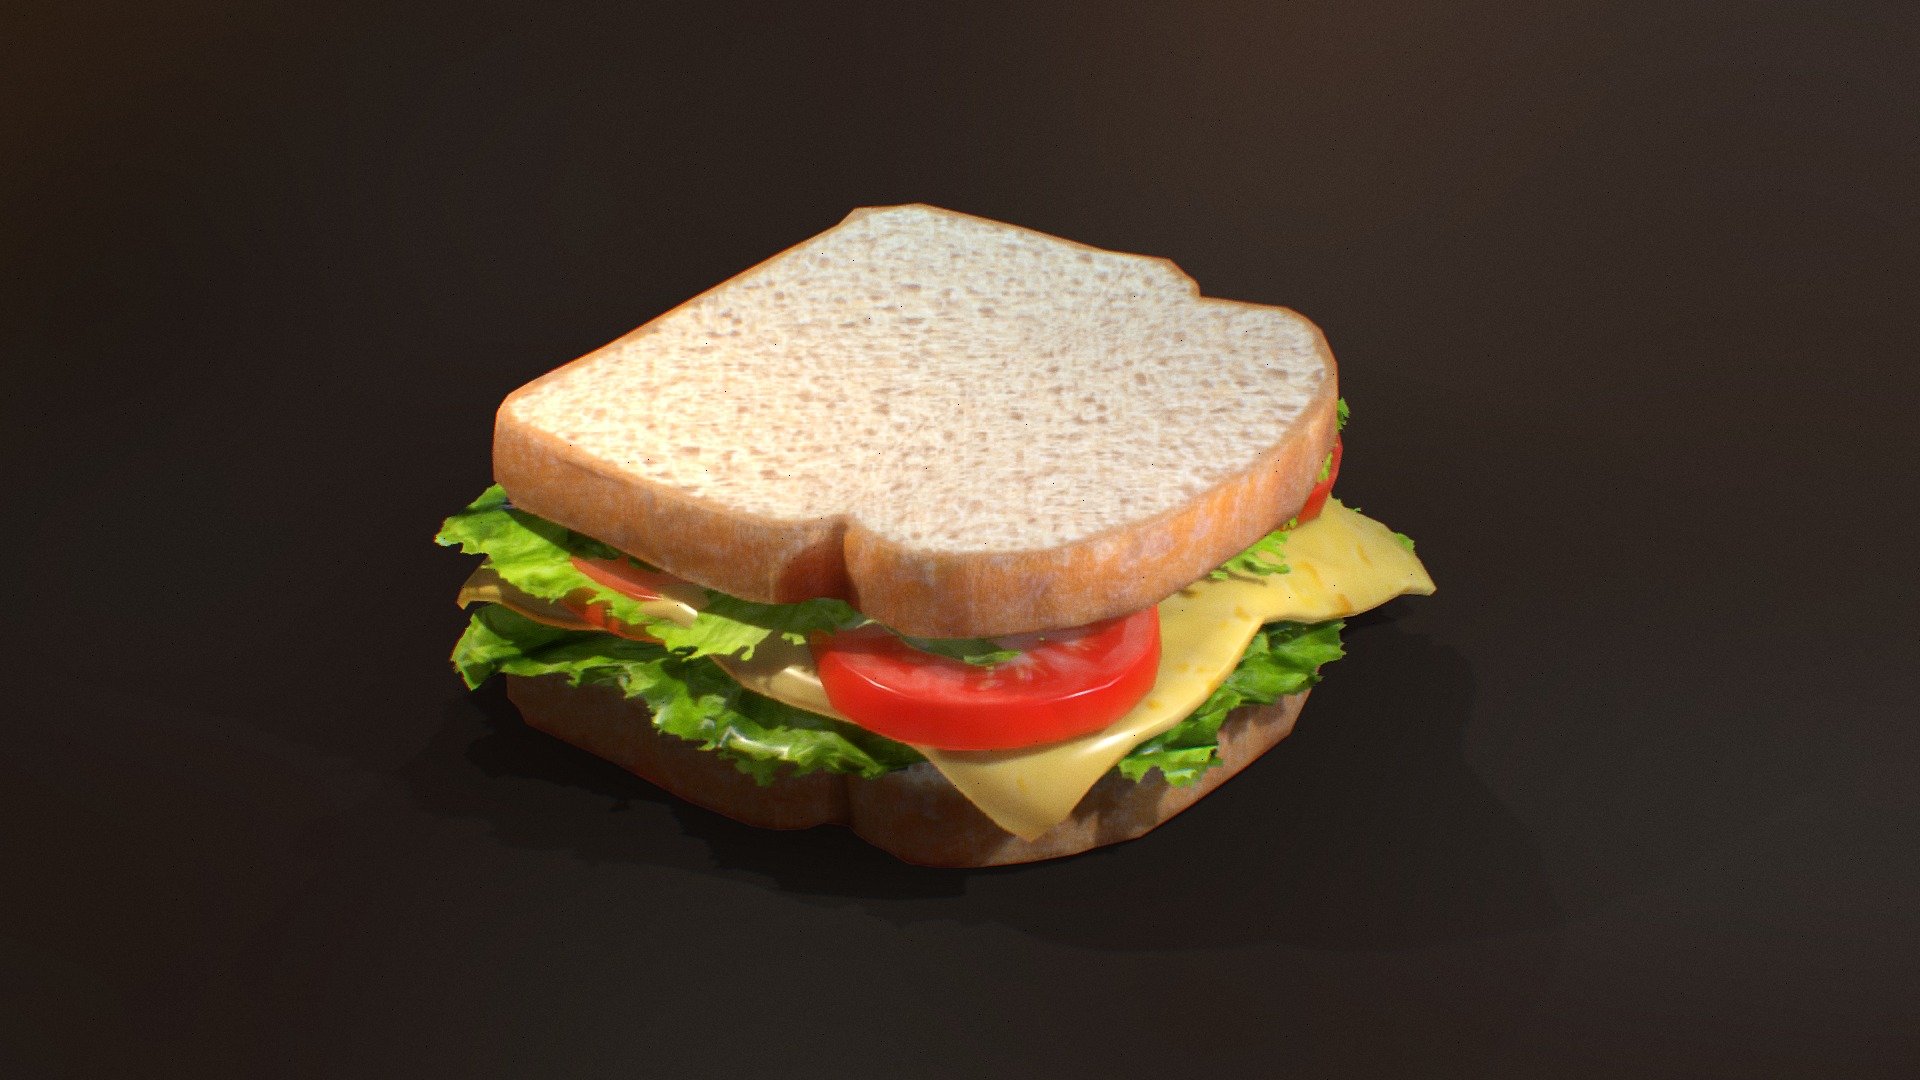 It is a 3d model of sandwich for using as fastfood item. It is can be used as a delicacy in games and many other render scenes.
This model is created in 3ds Max and textured in Substance Painter.
This model is made in real proportions.
High quality of textures are available to download.
Maps include - Base Color, Normal, Metallic, AO and Roughness Textures 3d model